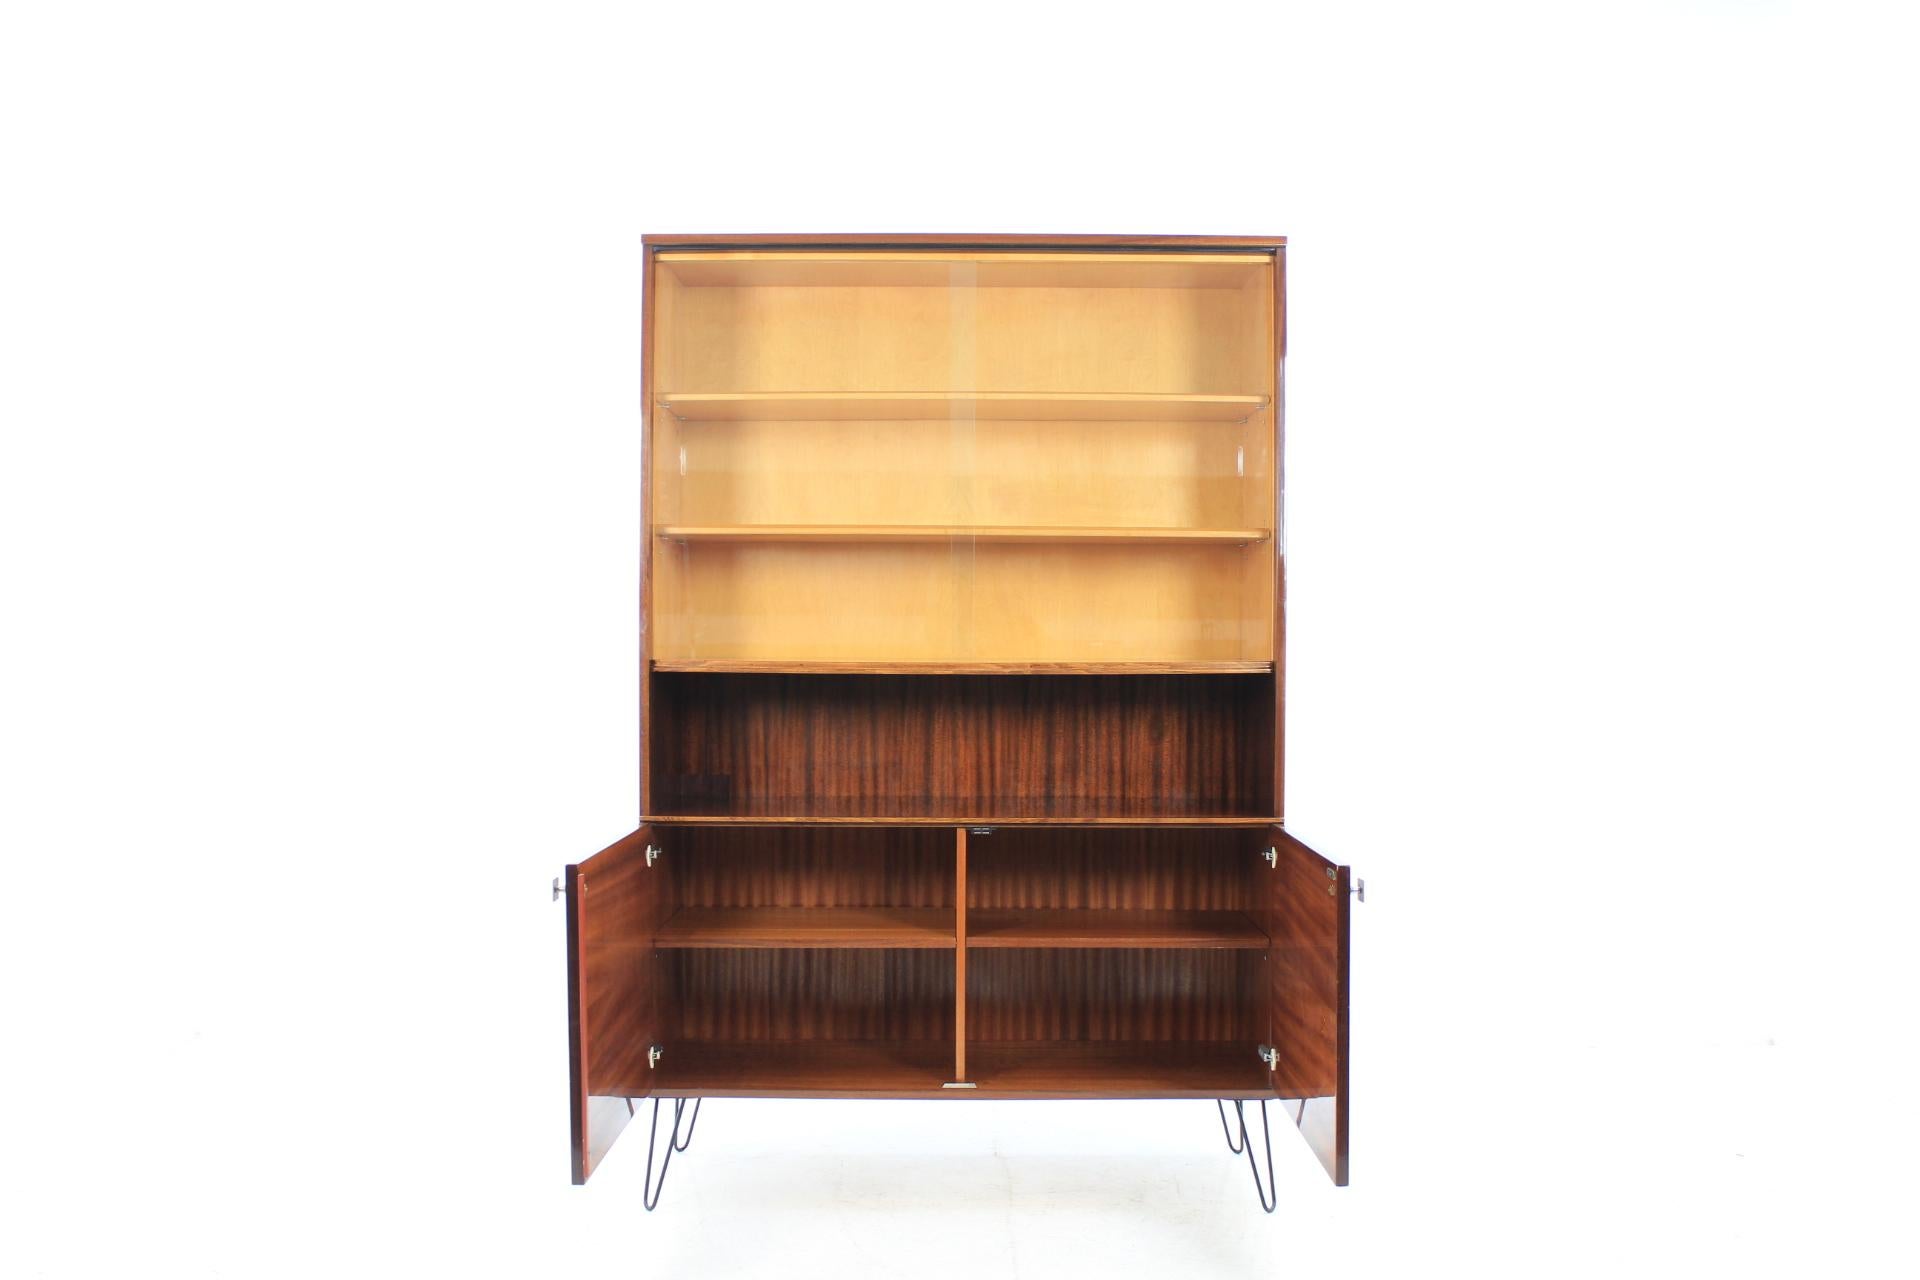 Bookcase made of mahogany and glass. The item made from Interier Praha in Czechoslovakia. The iron legs were added afterwards. Original condition.